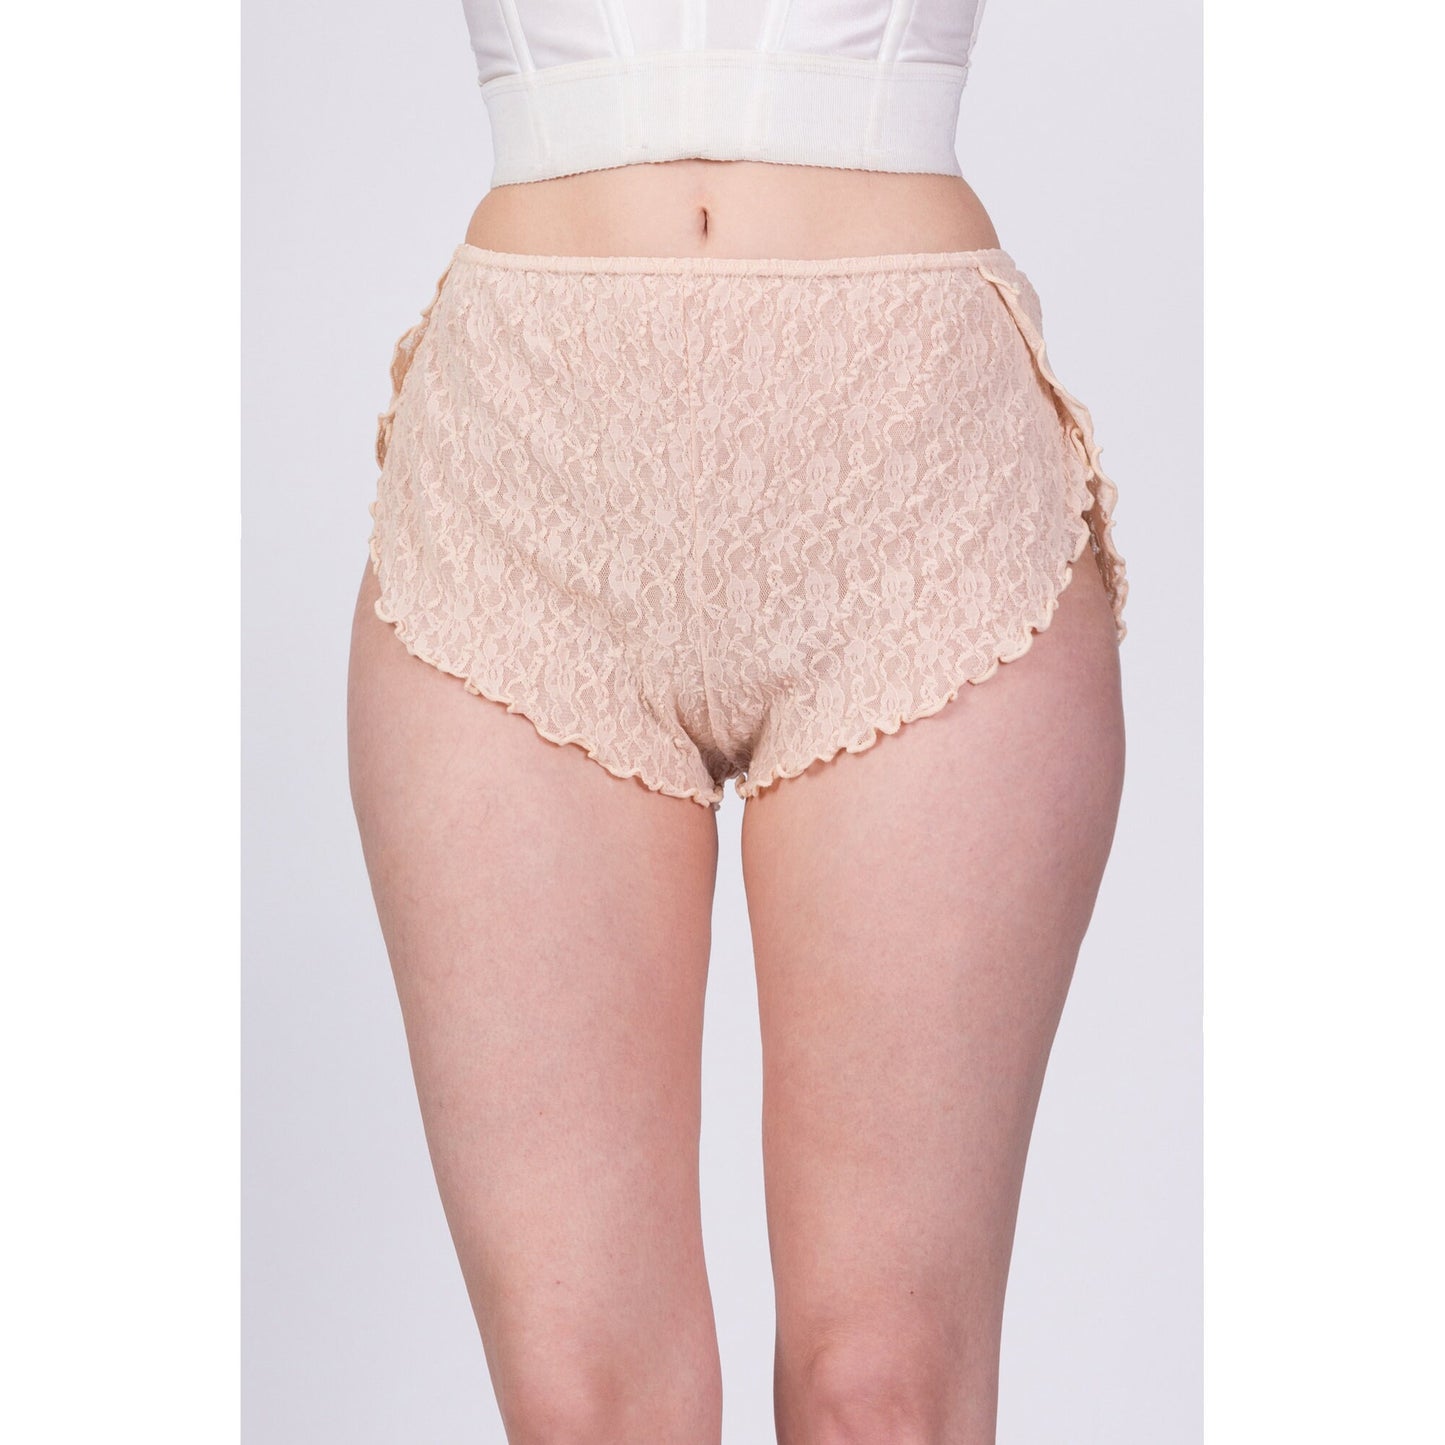 70s Peach Floral Lace Tap Pants - Small 